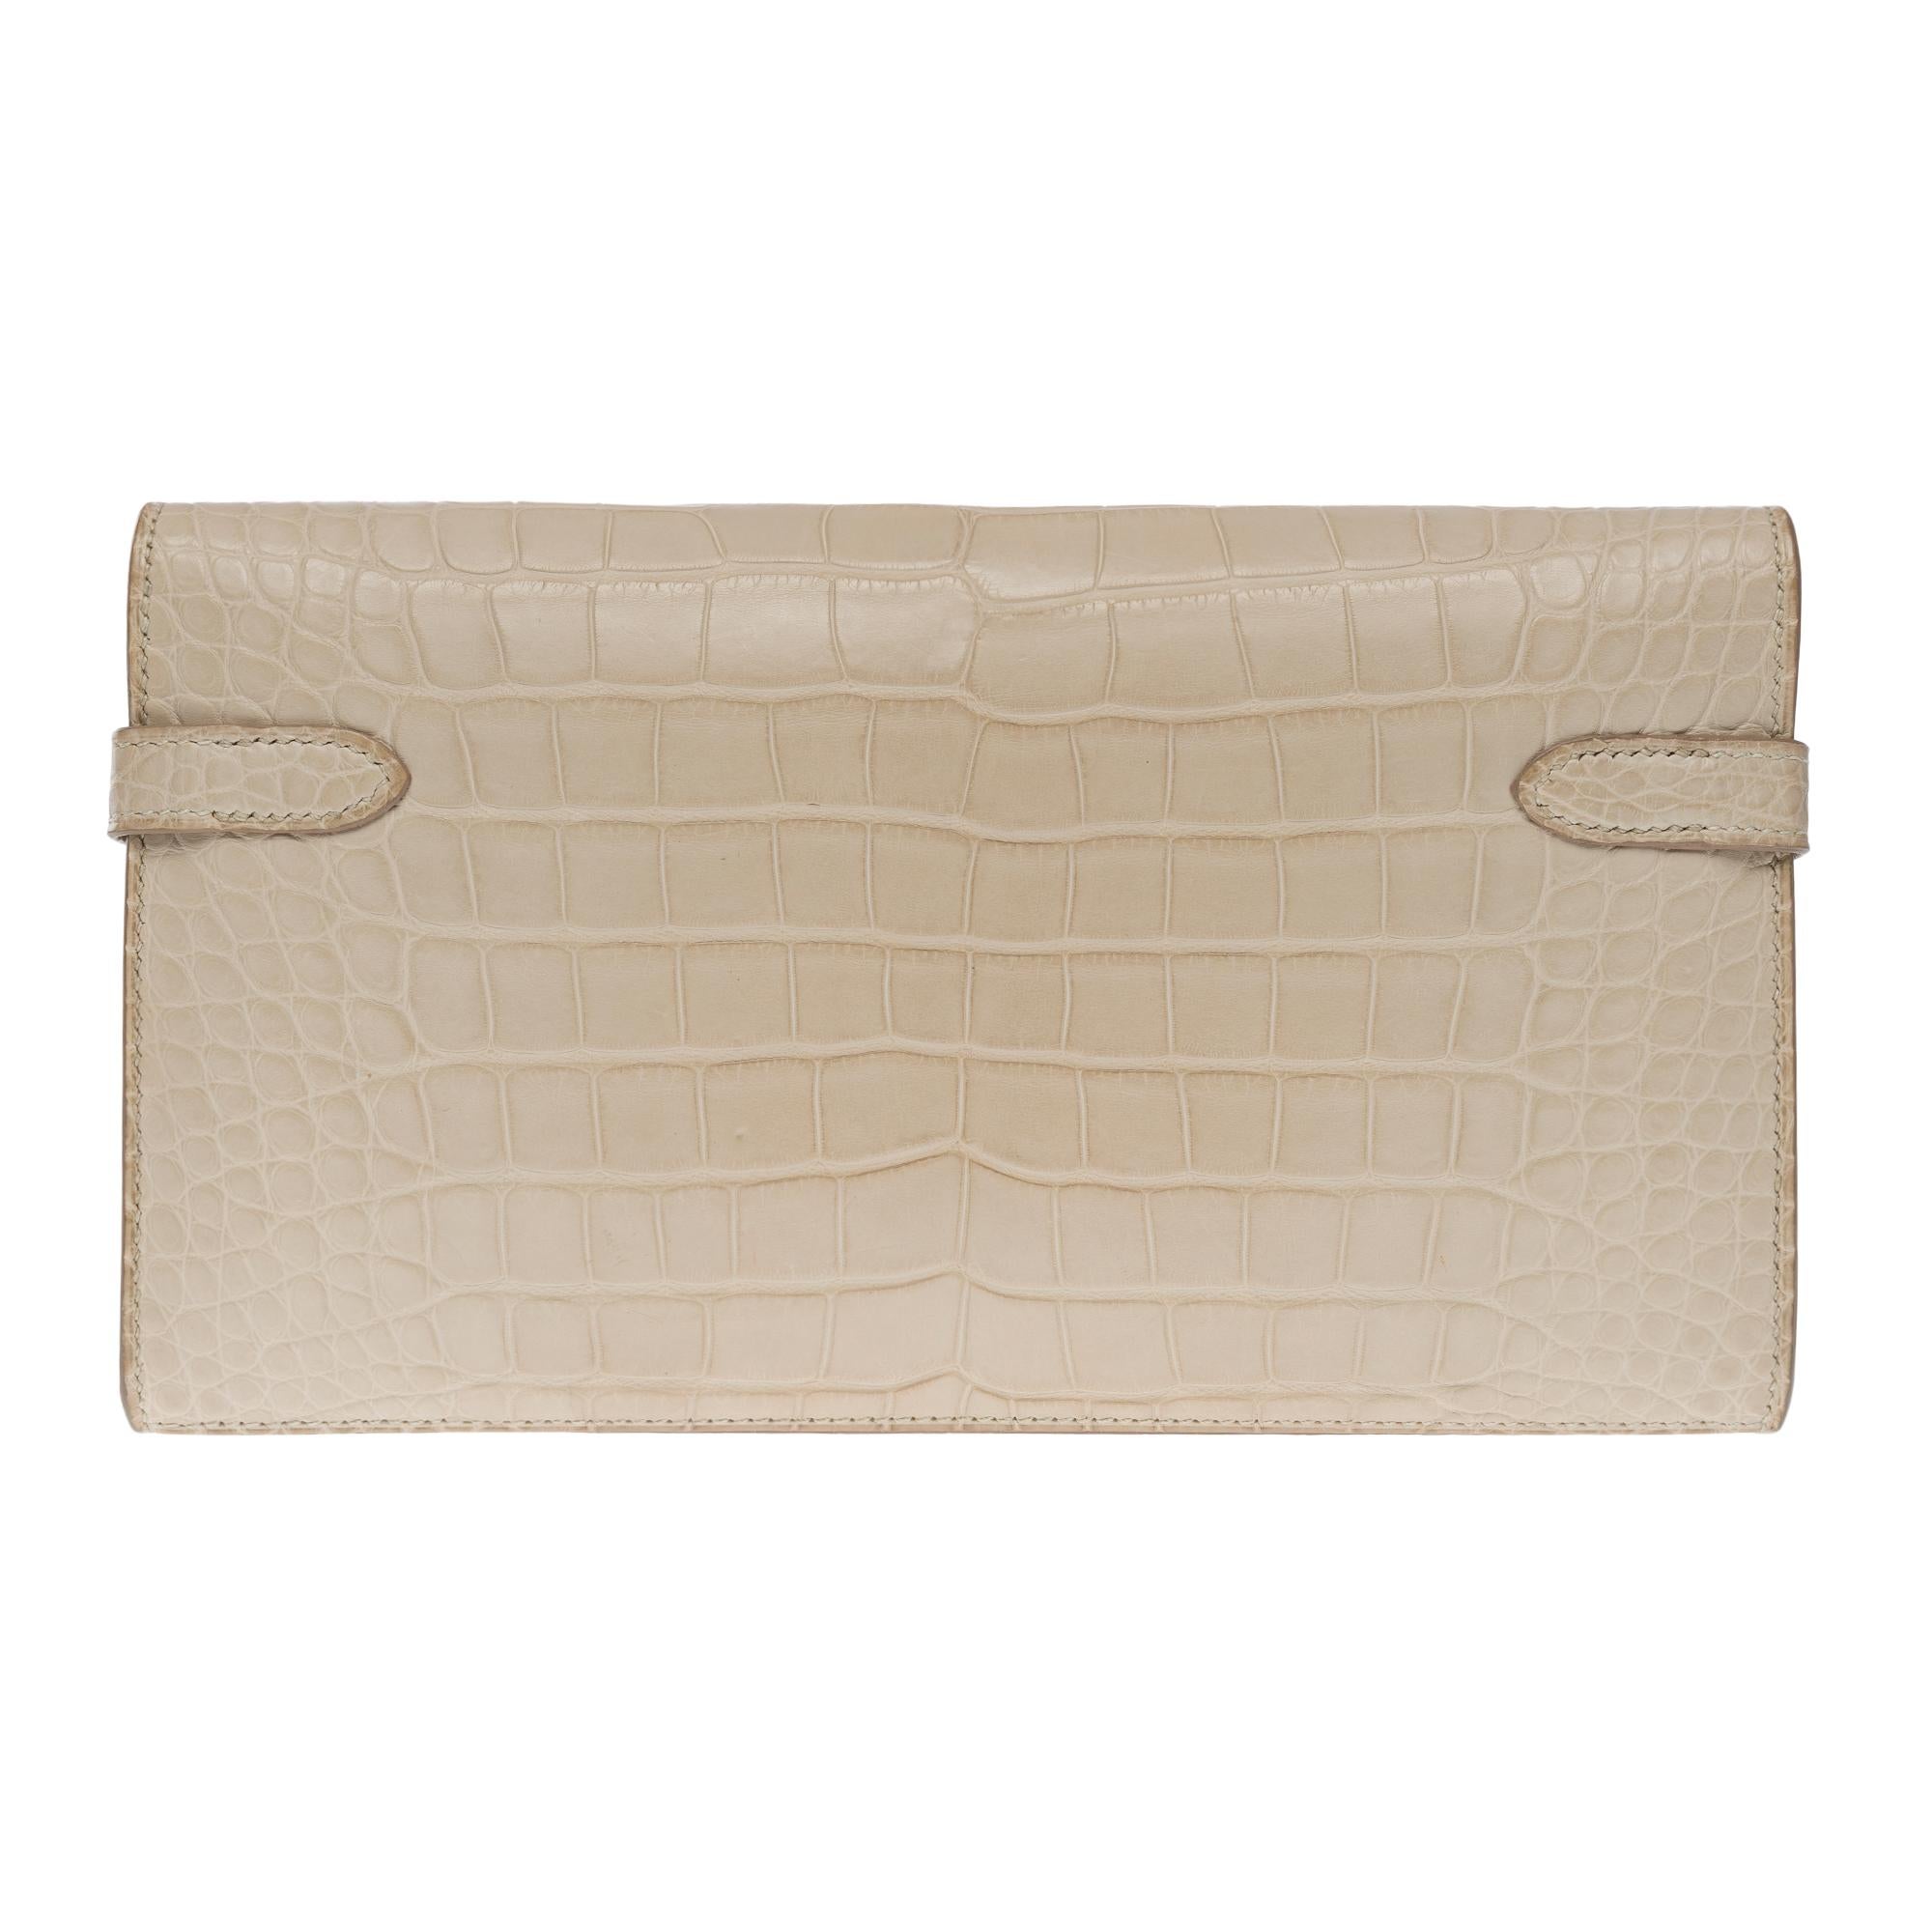 Beautiful & Rare Hermès Kelly Wallet in Beton (concrete) Alligator, SHW In Excellent Condition For Sale In Paris, IDF